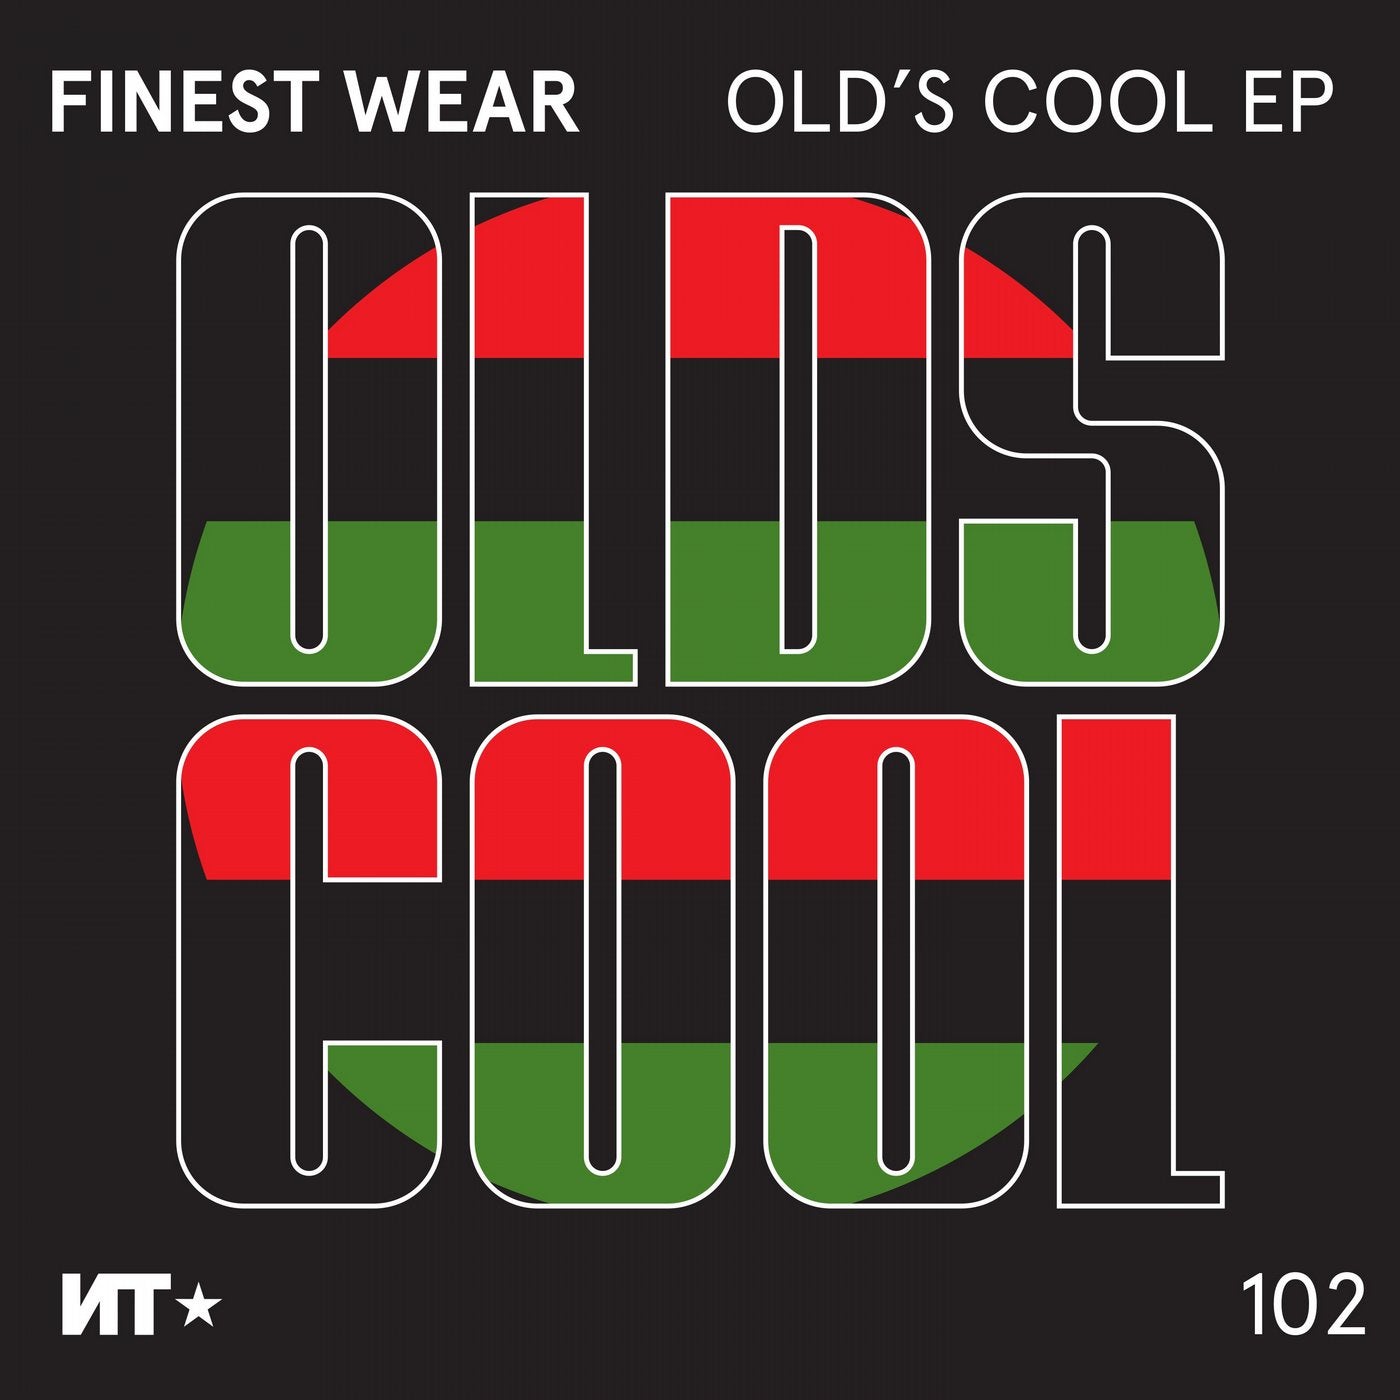 Old's Cool EP